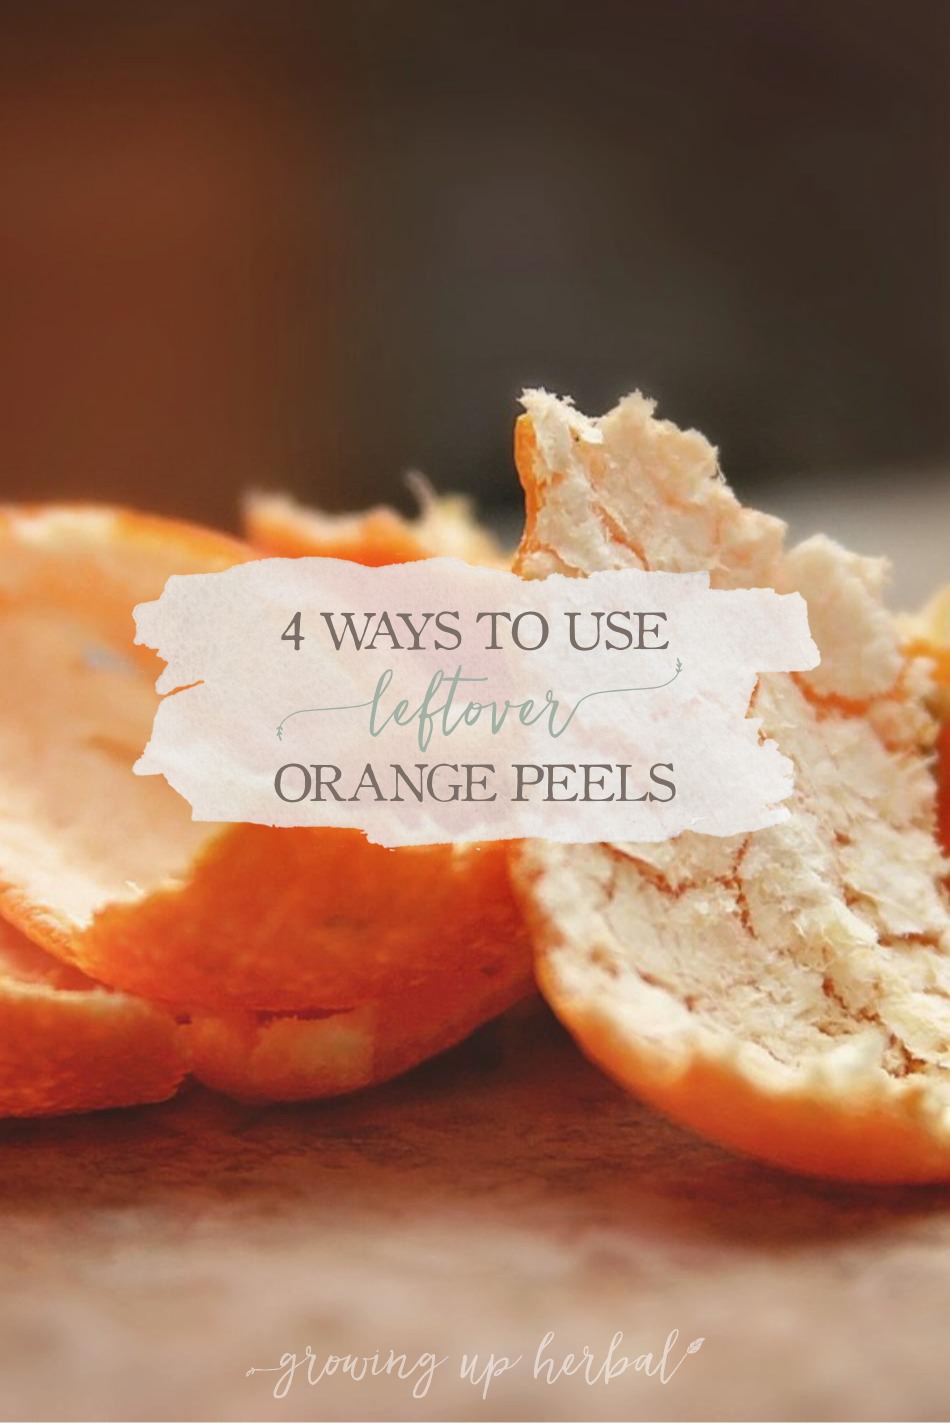 4 Ways To Use Leftover Orange Peels | Growing Up Herbal | Have a surplus of orange peels? Don't throw them away. Instead, put your leftover orange peels to use with these four easy DIY projects!